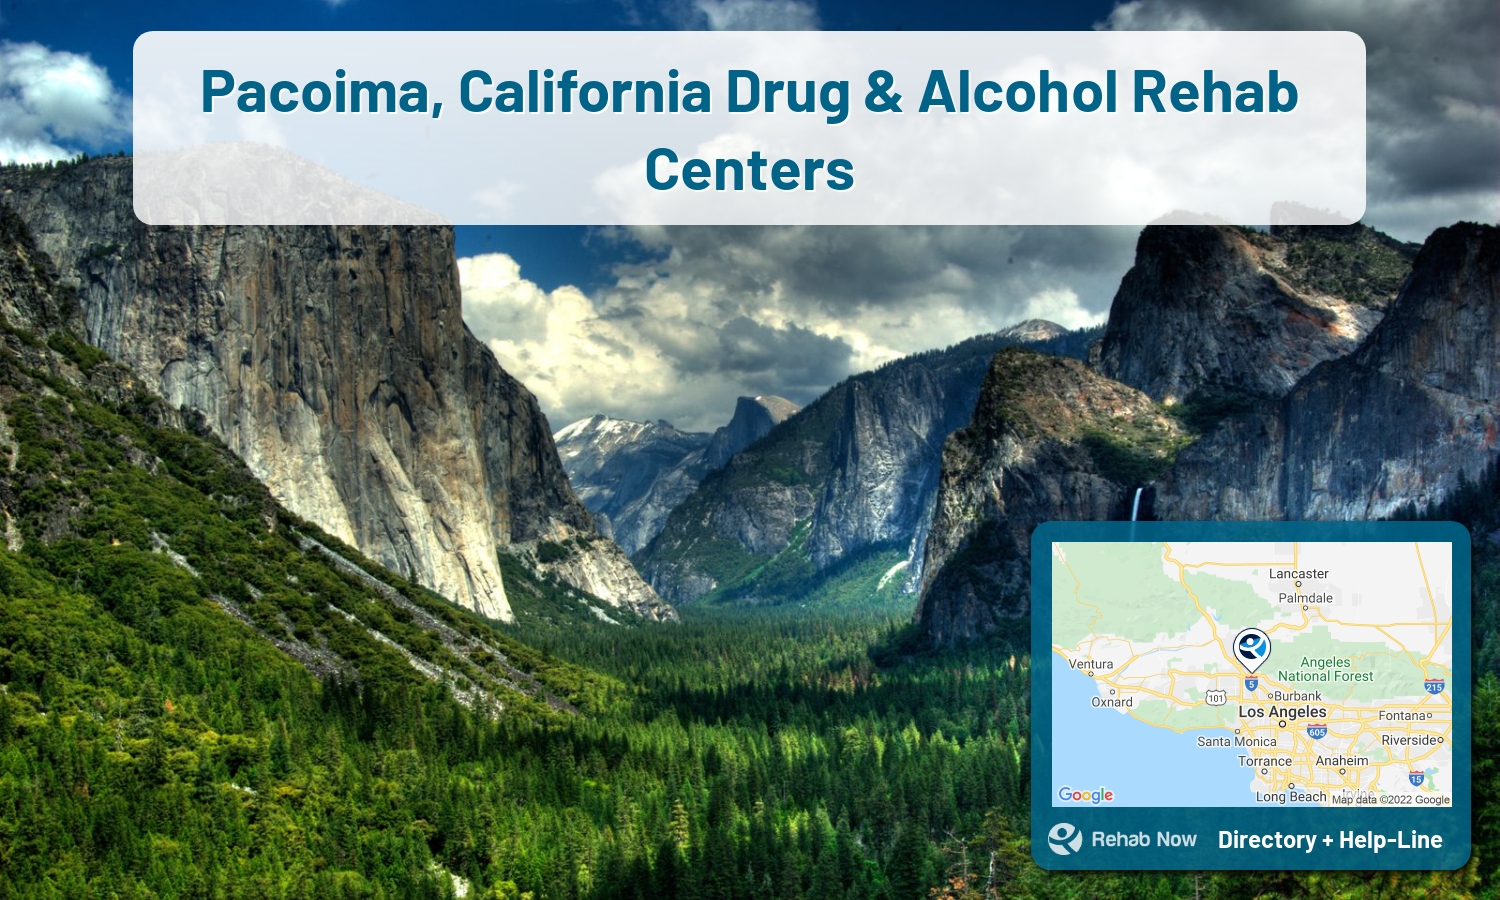 Our experts can help you find treatment now in Pacoima, California. We list drug rehab and alcohol centers in California.